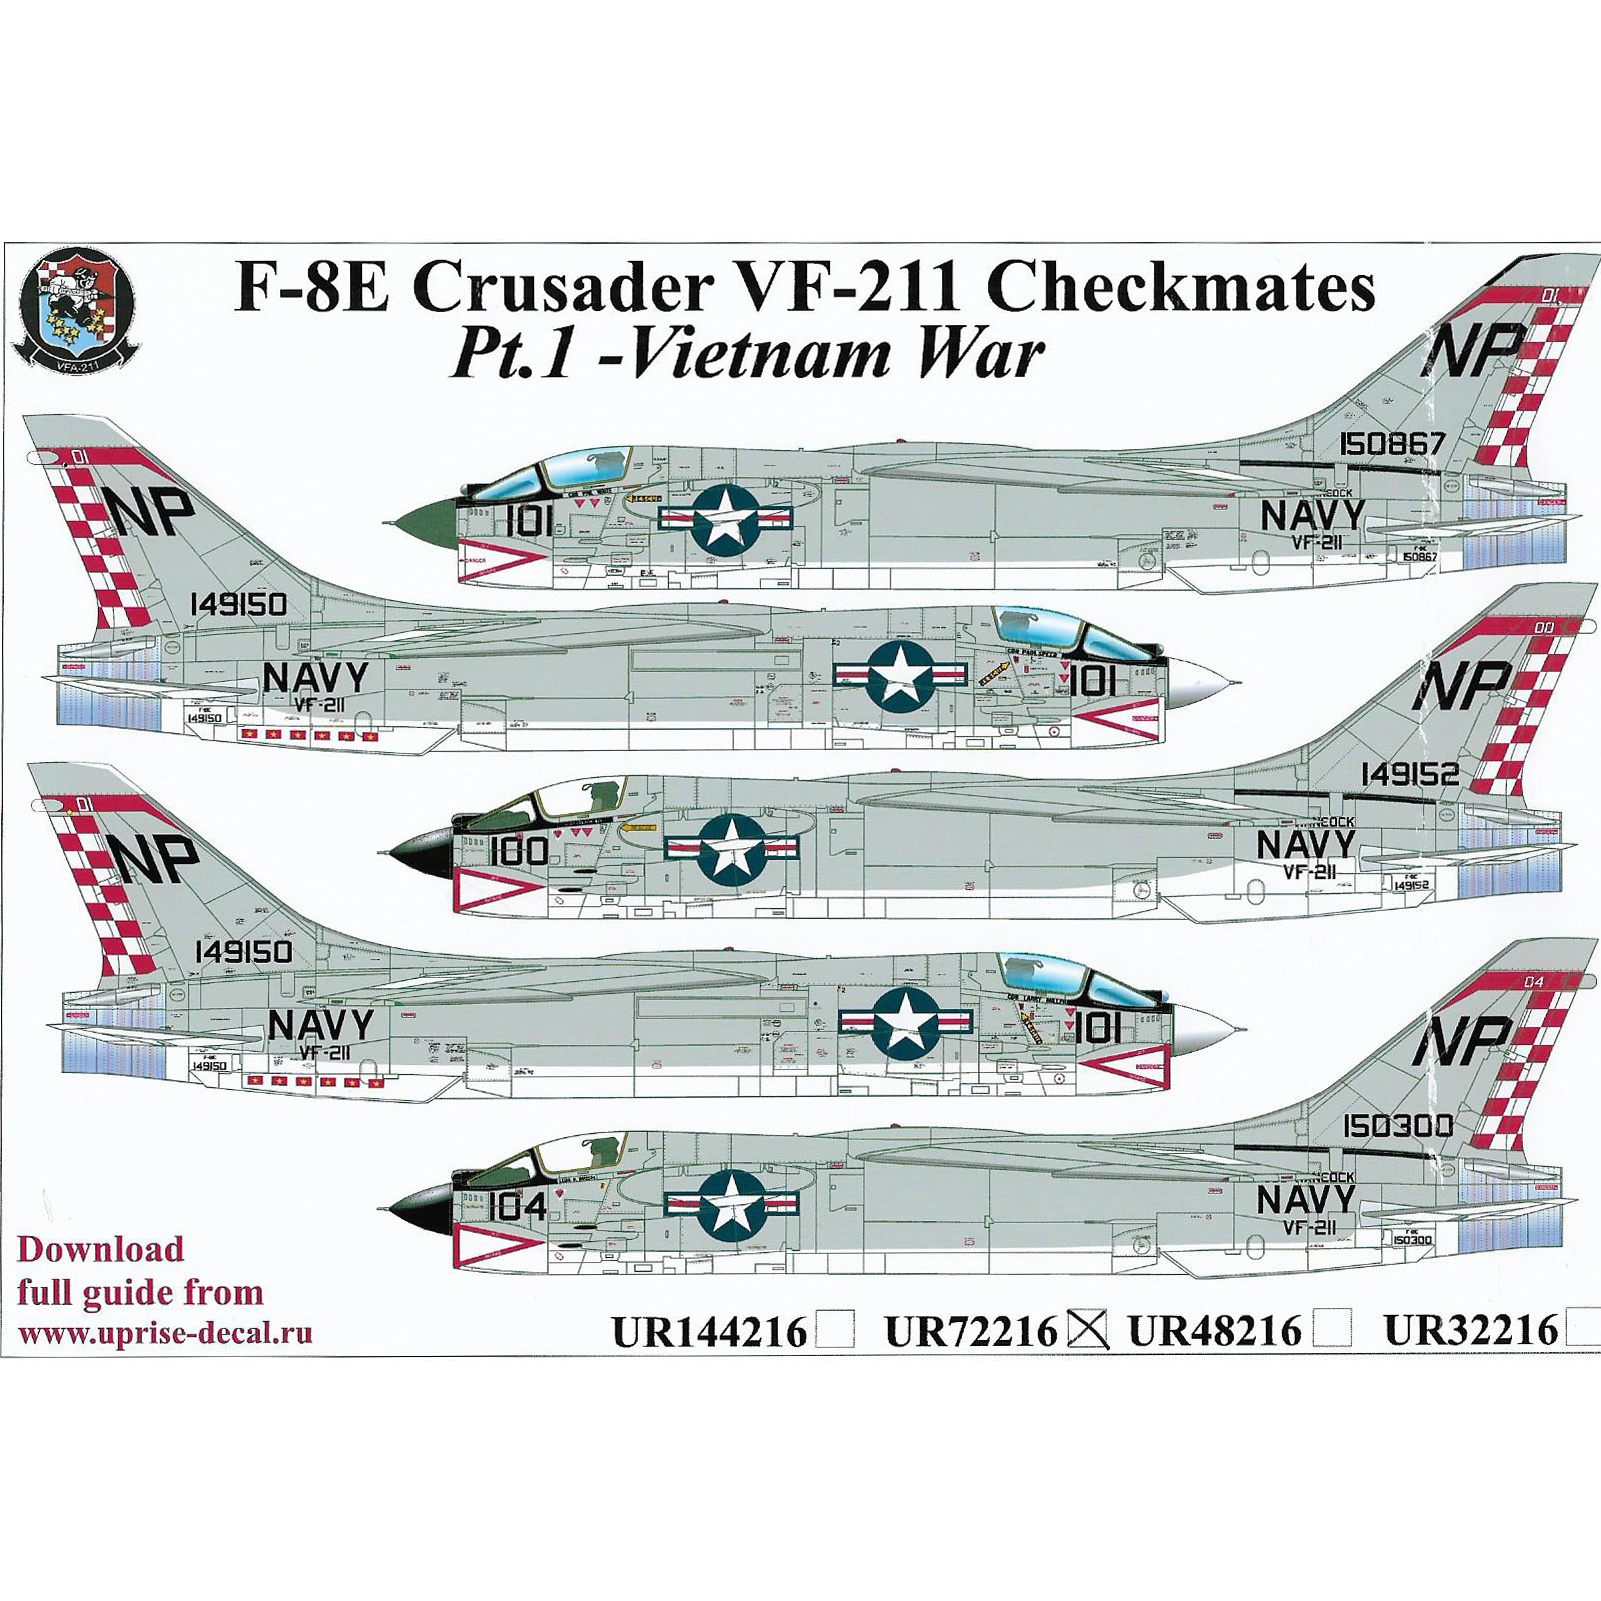 UR72216 Sunrise 1/72 Decals for F-8E Crusader VF-211 Checkmates Pt.1, FFA (removable lacquer substrate)